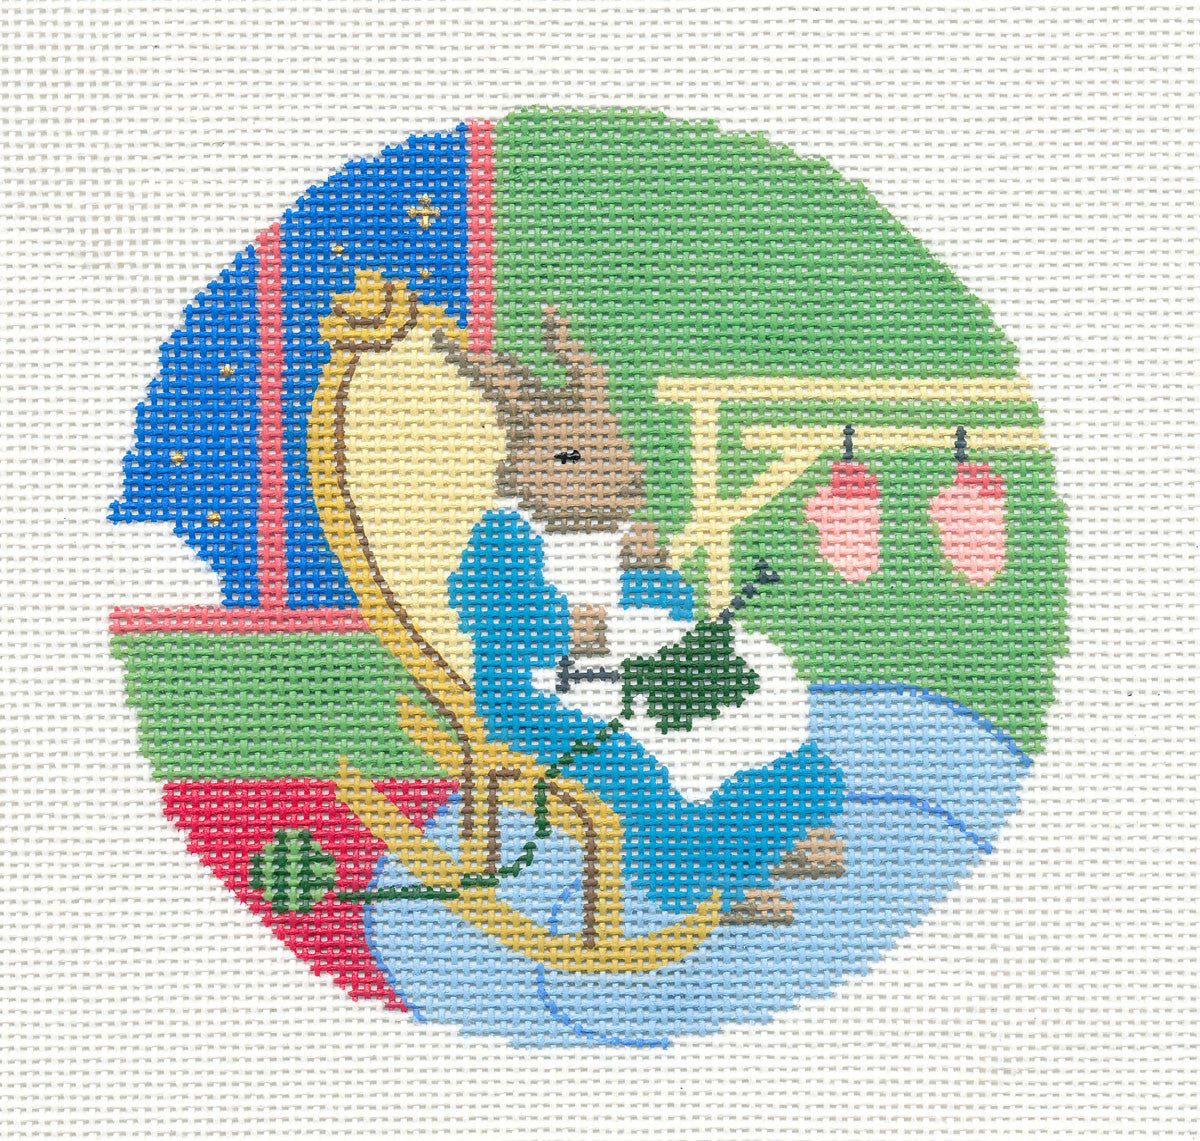 Child's Round ~ Goodnight Moon Grandma Bunny Knitting handpainted 4.25" Needlepoint Canvas by Silver Needle